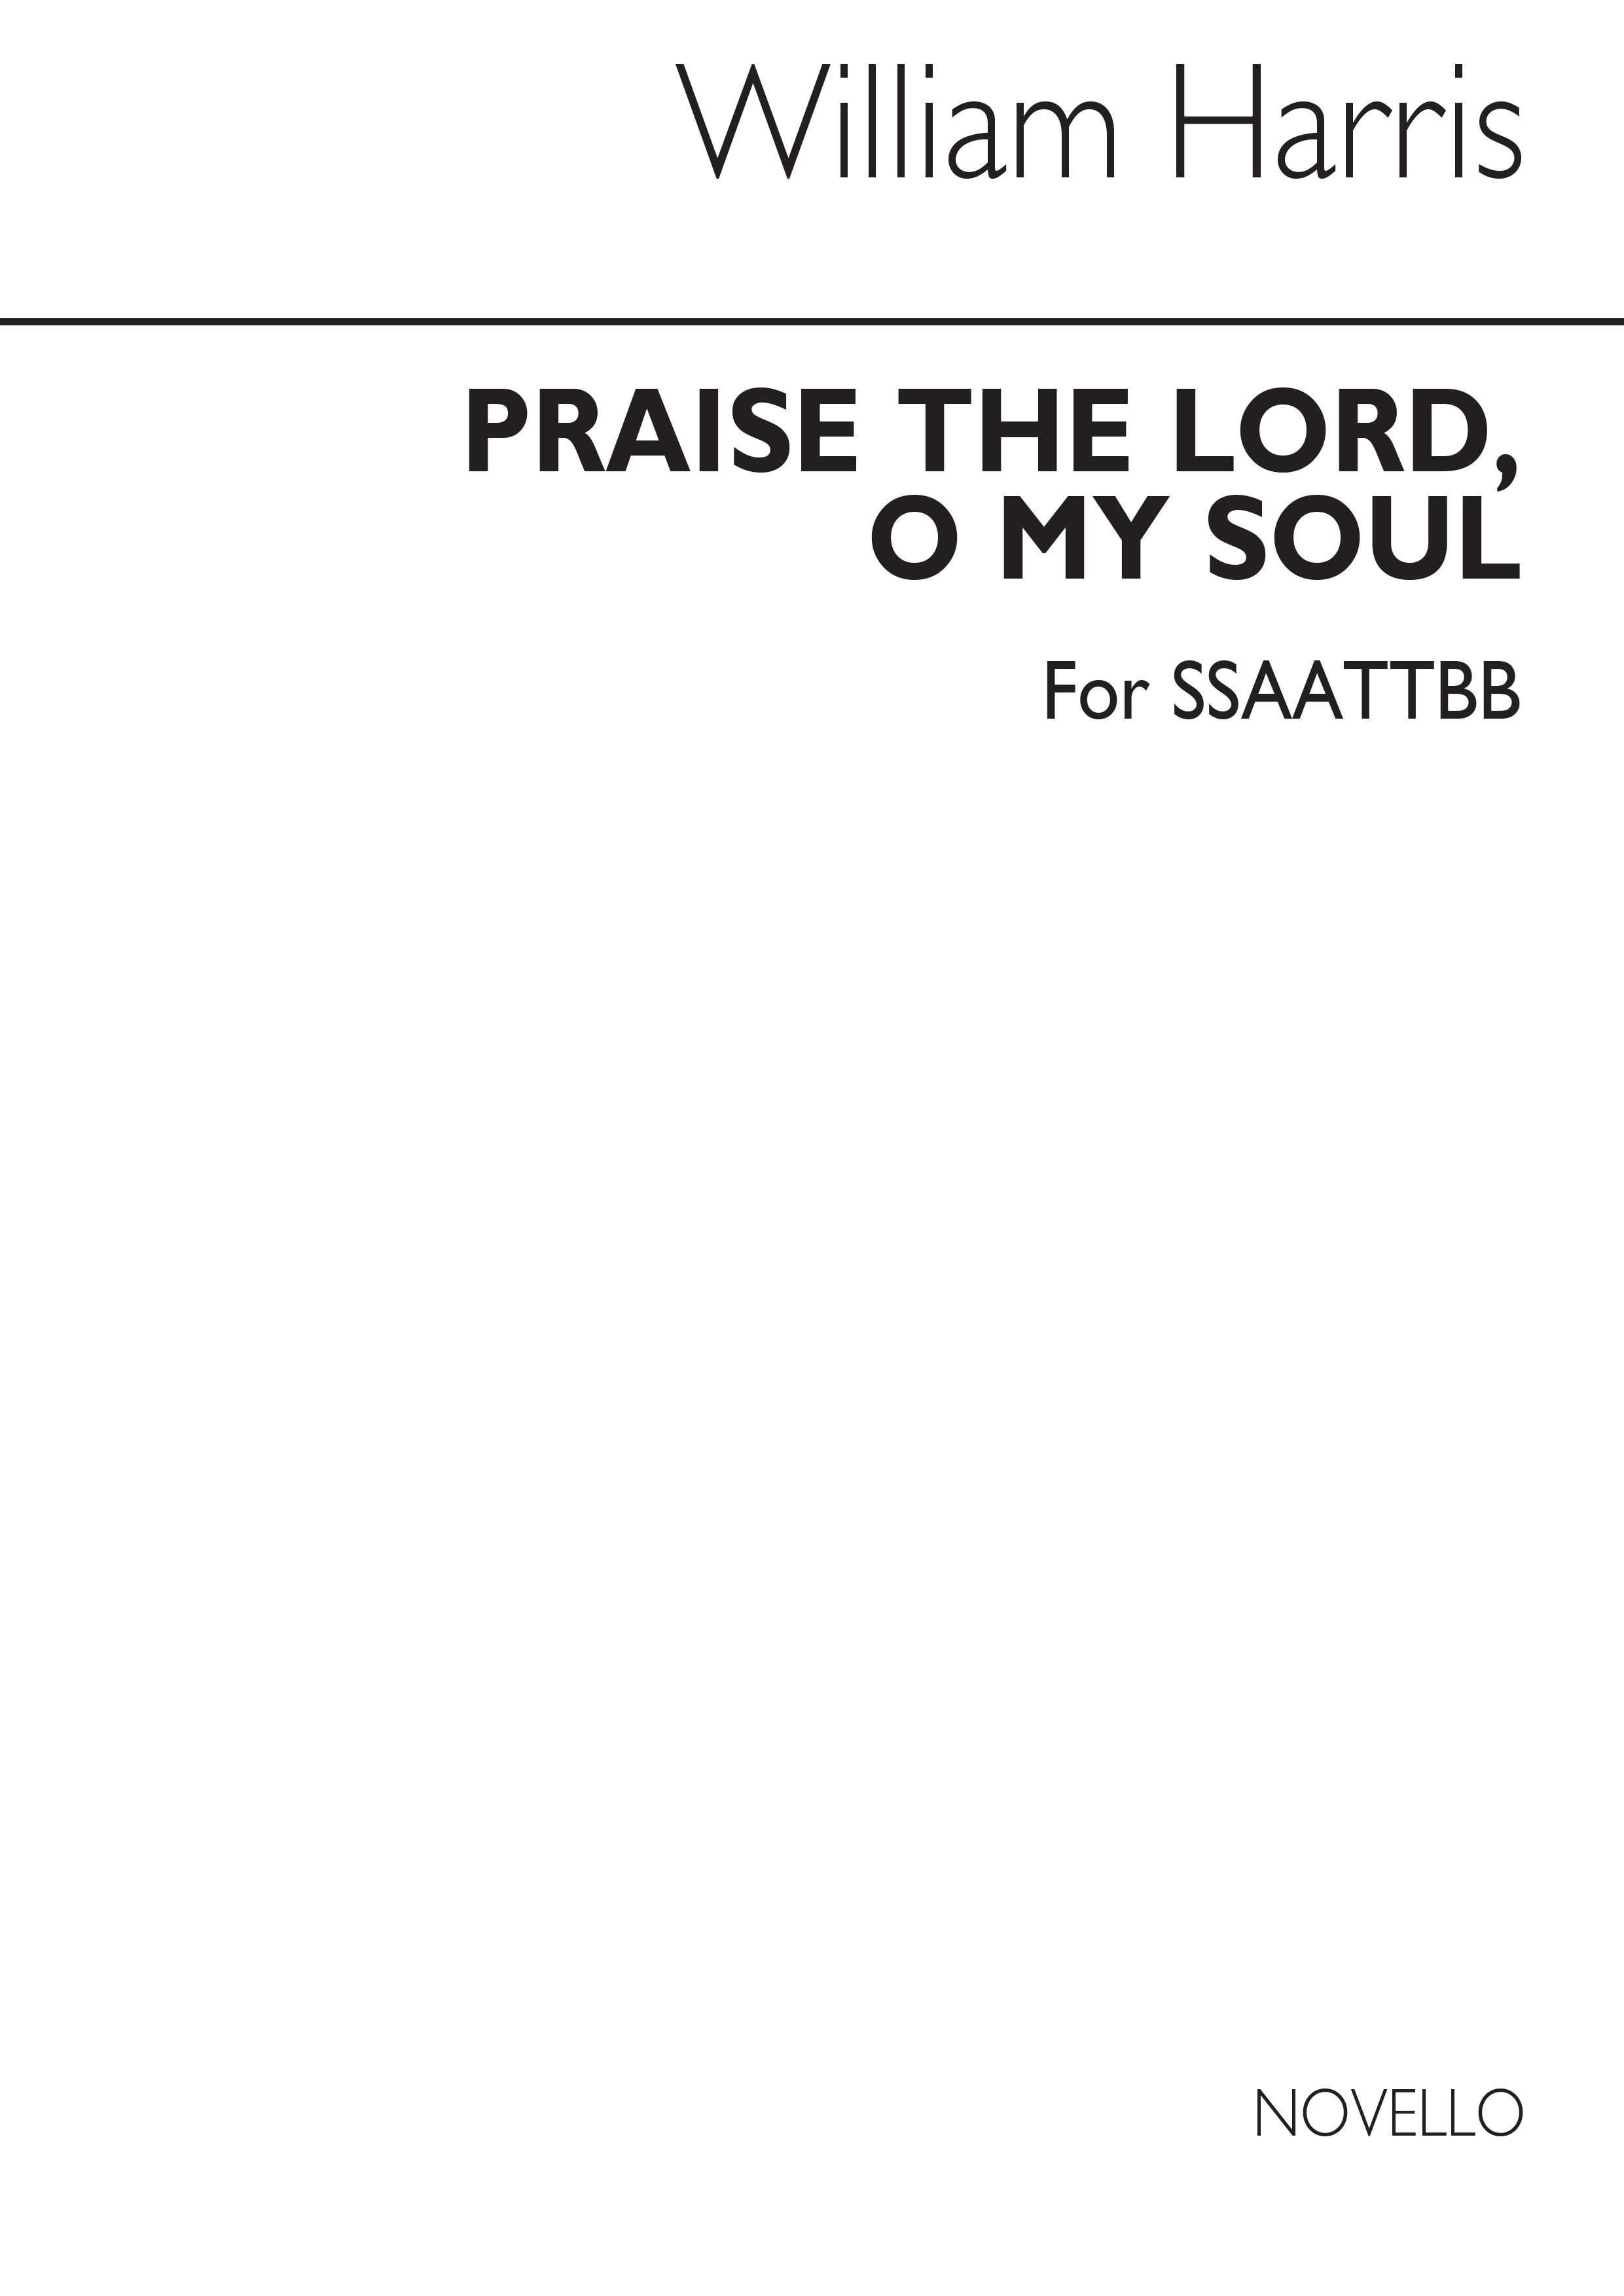 William H. Harris: Praise The Lord O My Soul